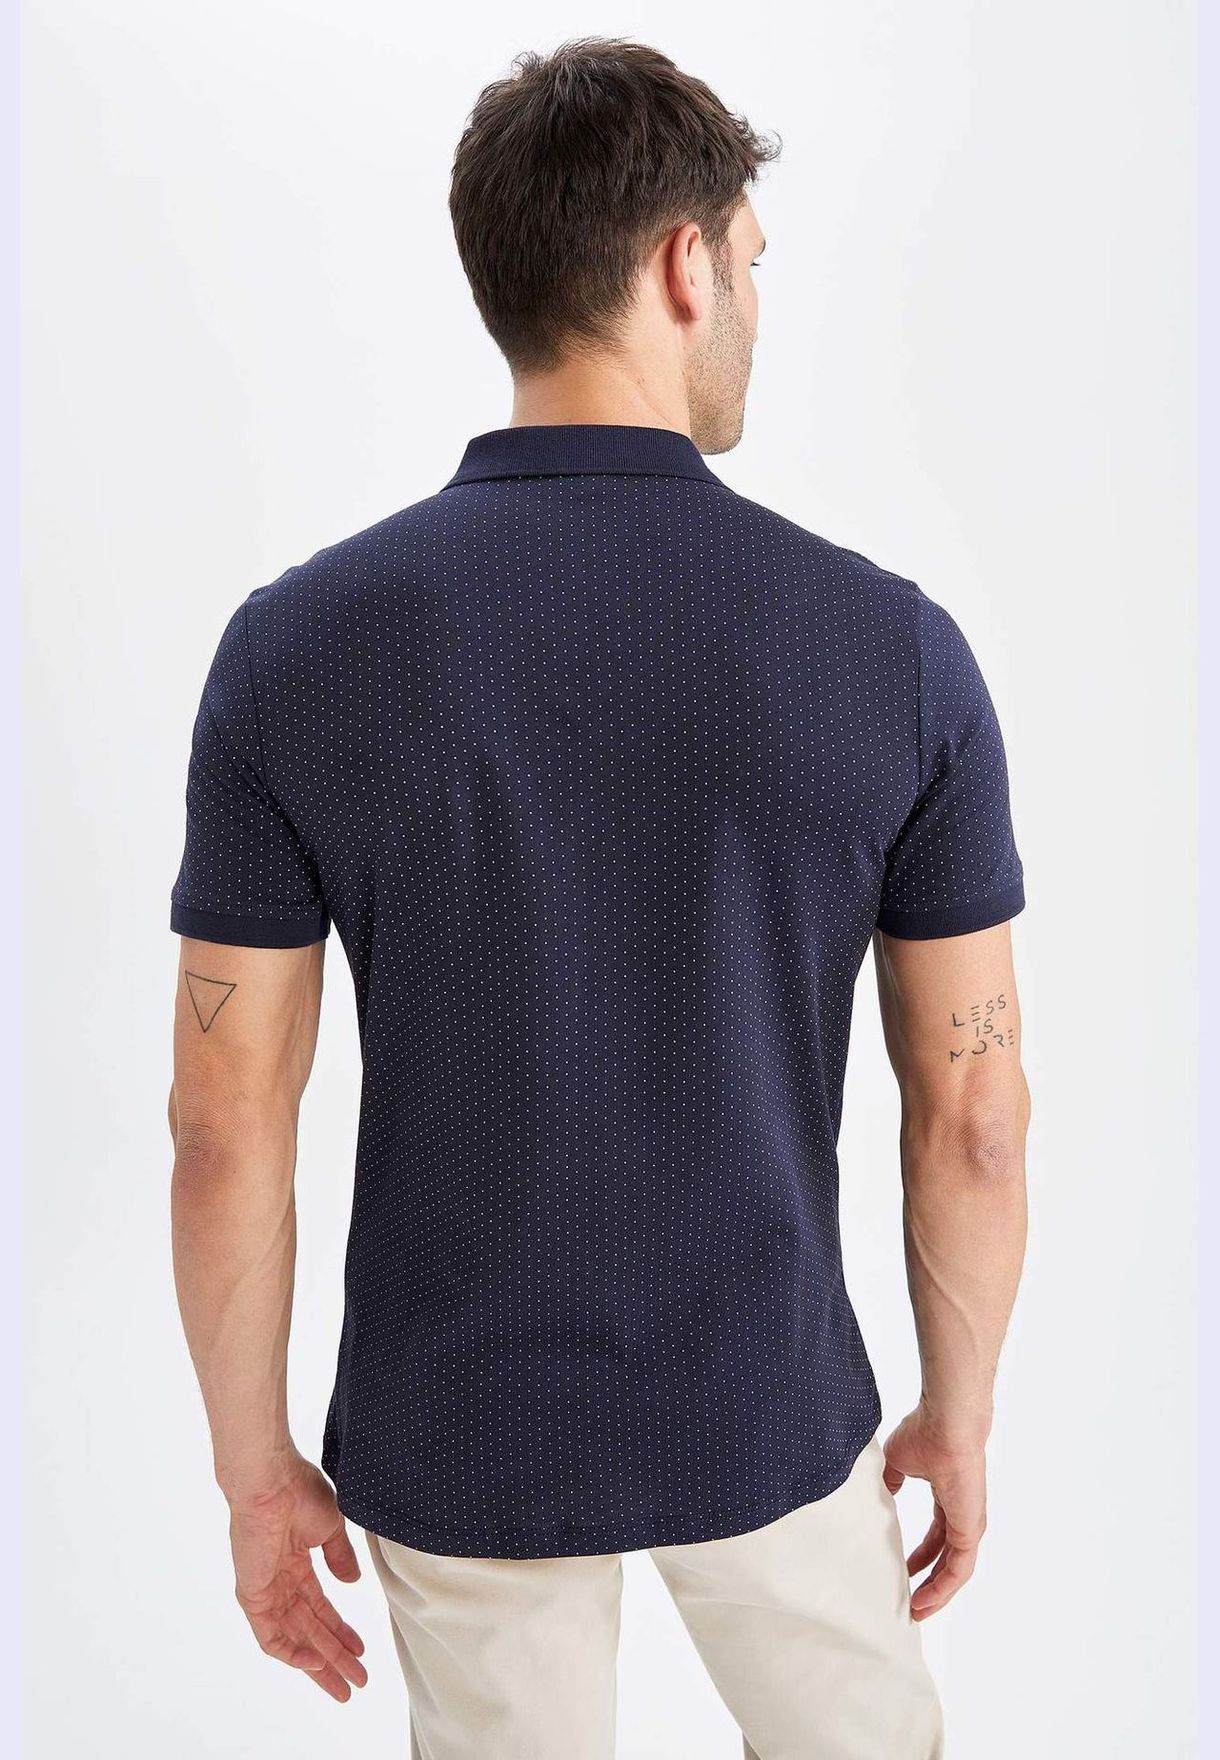 Slim Fit Patterned Short Sleeve Polo Shirt